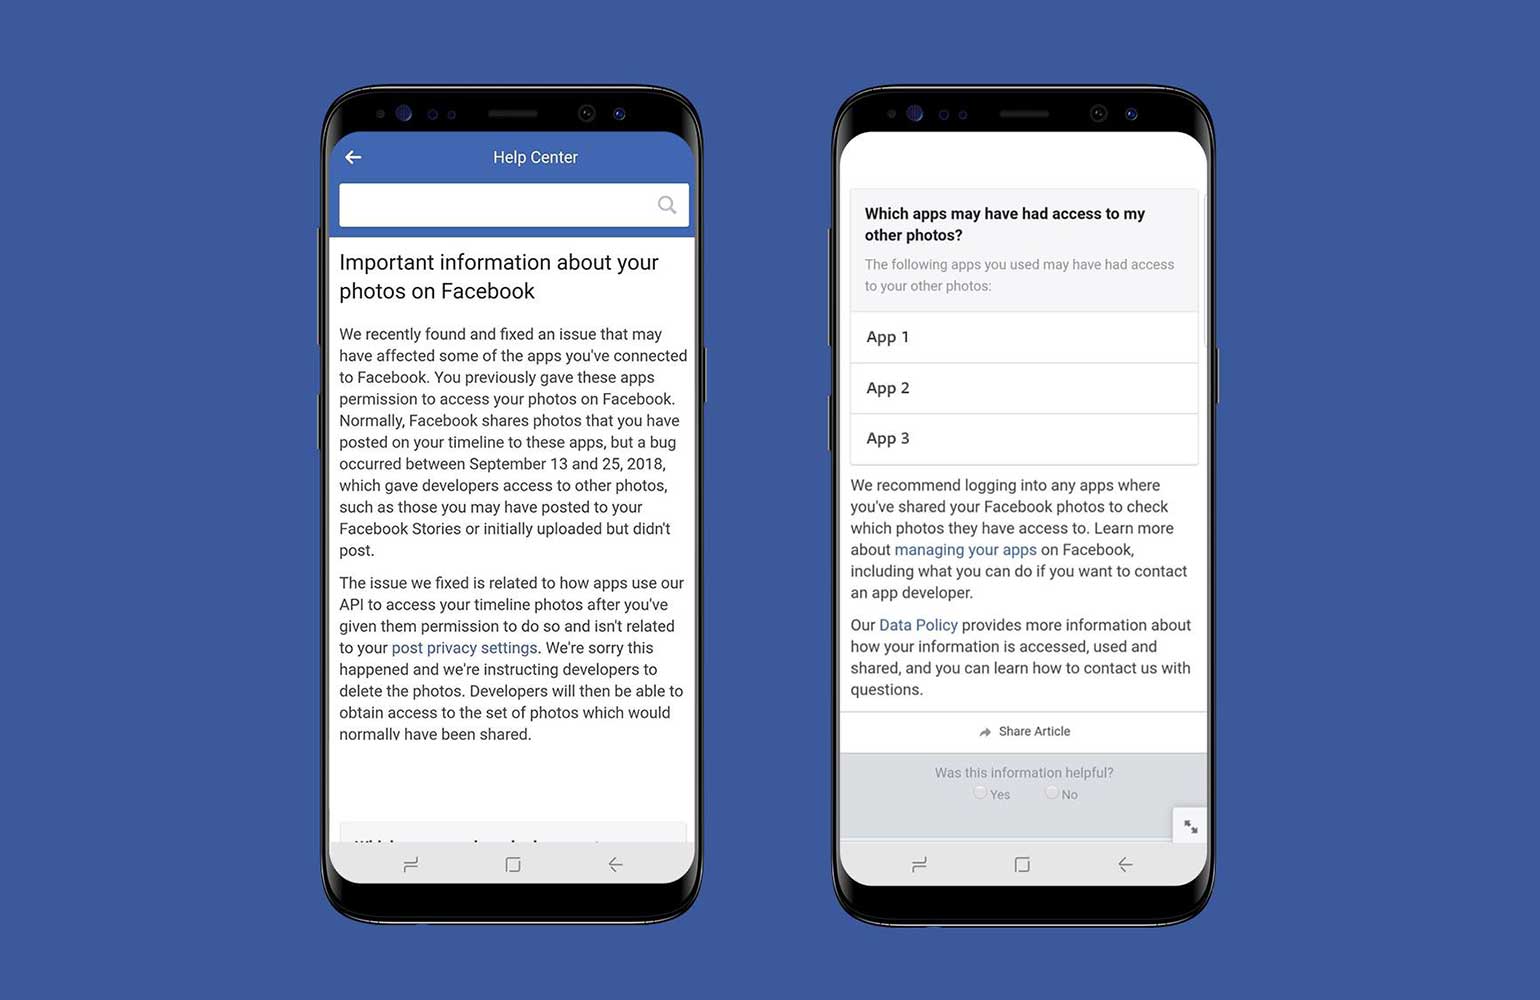 Facebook accidentally exposed users private photos to third party developers in September